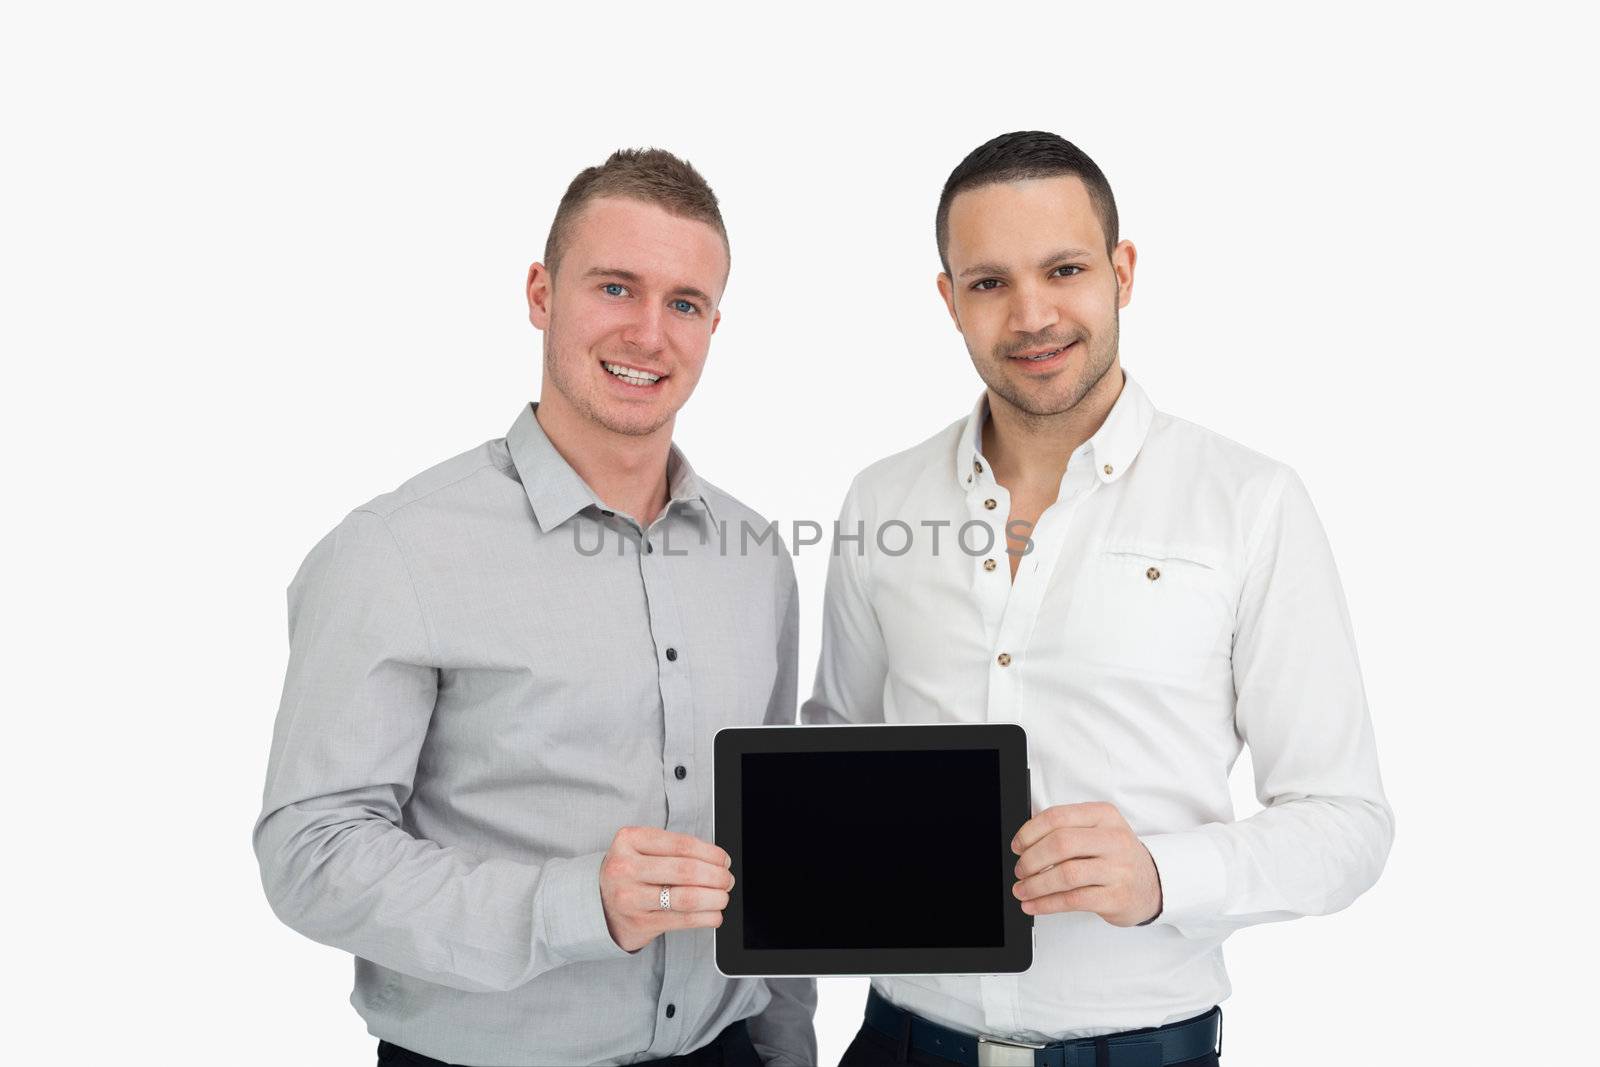 Two smiling men holding a tablet computer against a white background